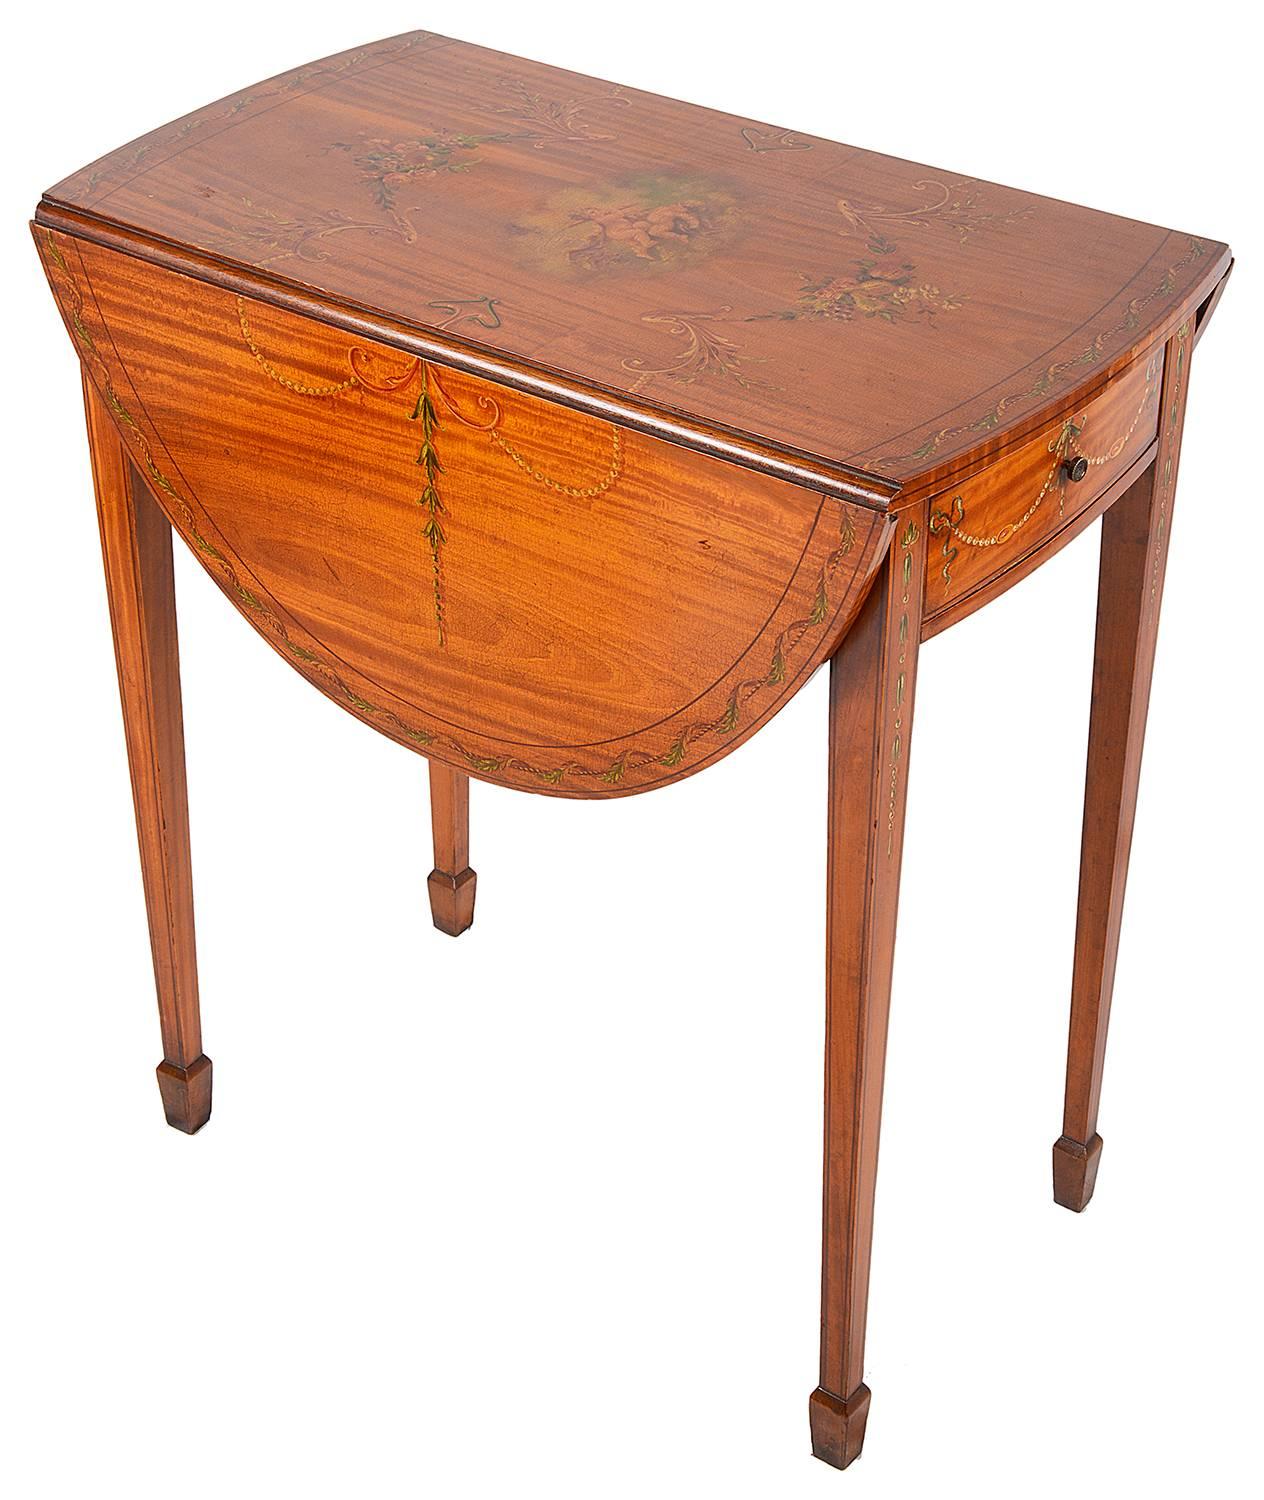 An Edwardian period satinwood Pembroke table, having classical painted decoration, a frieze drawer, drop leaves and raised on square tapering legs.